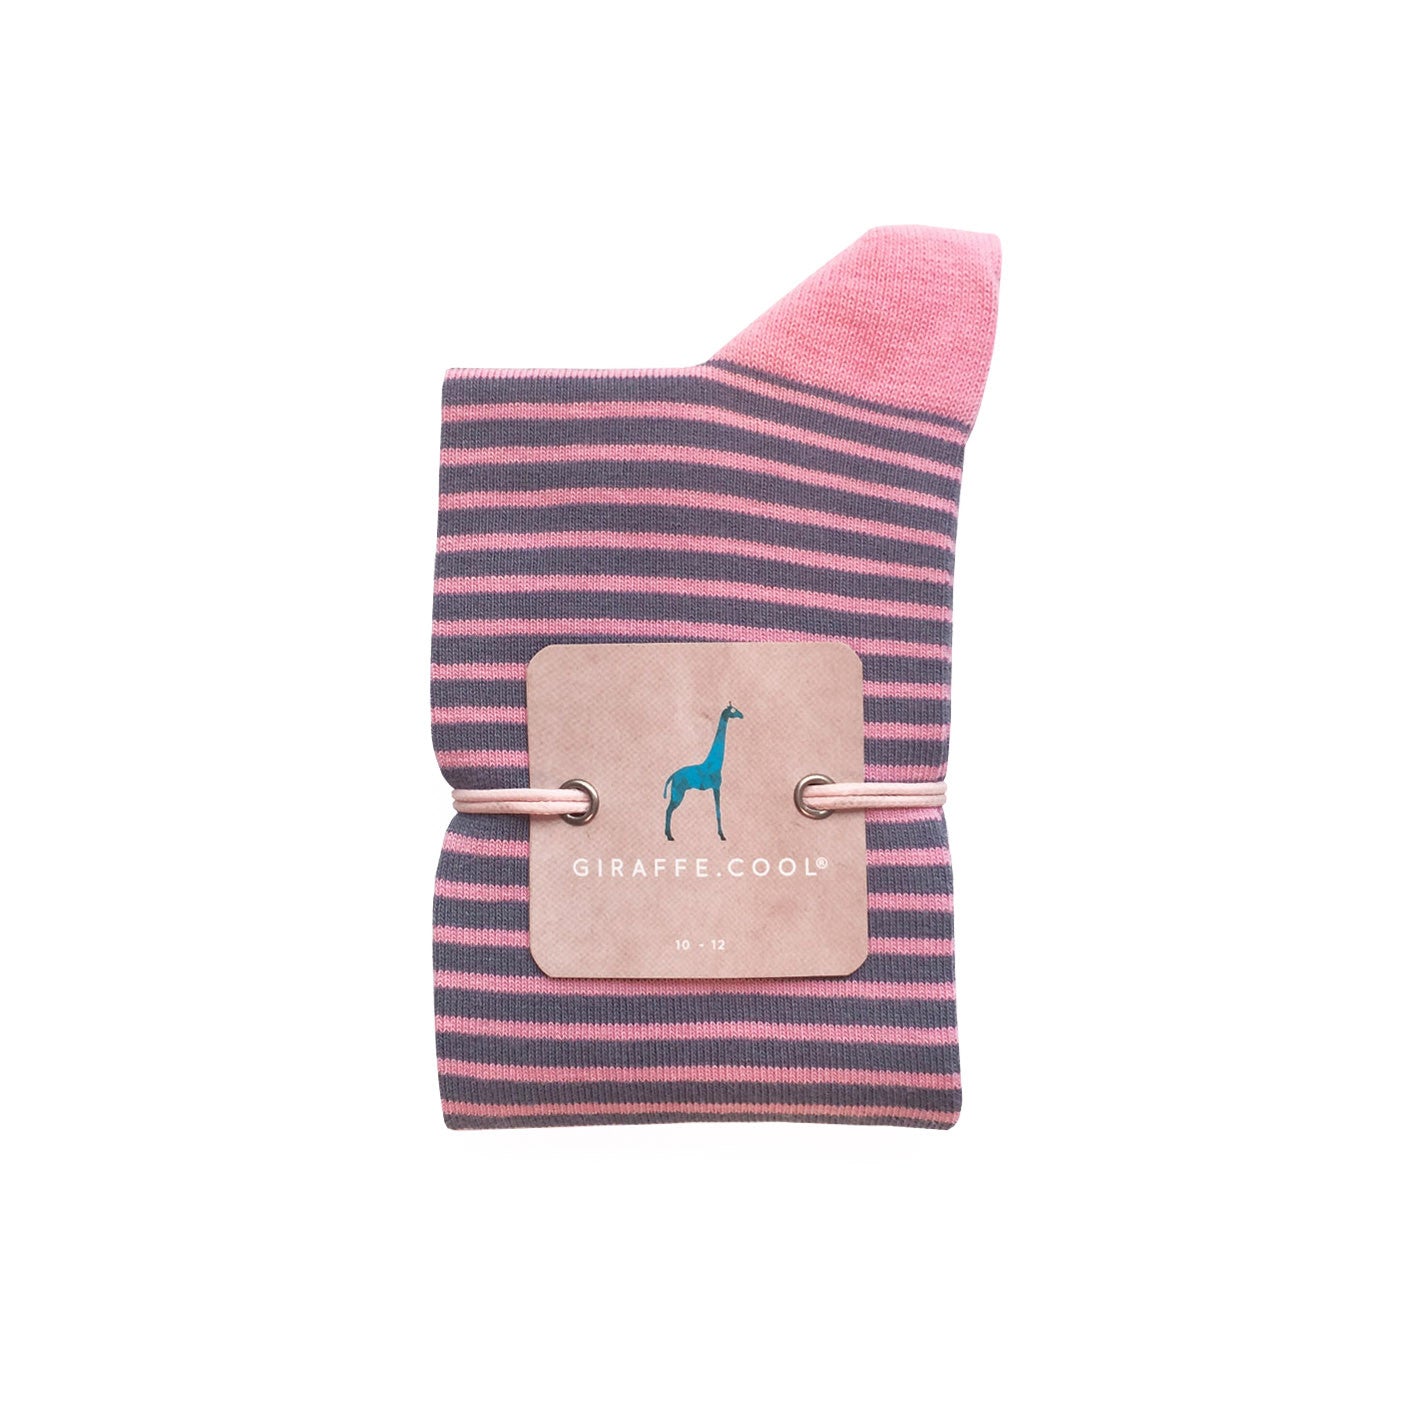 Giraffe Cool | Blue And Pink Stripes Brushed Cotton Socks Closed